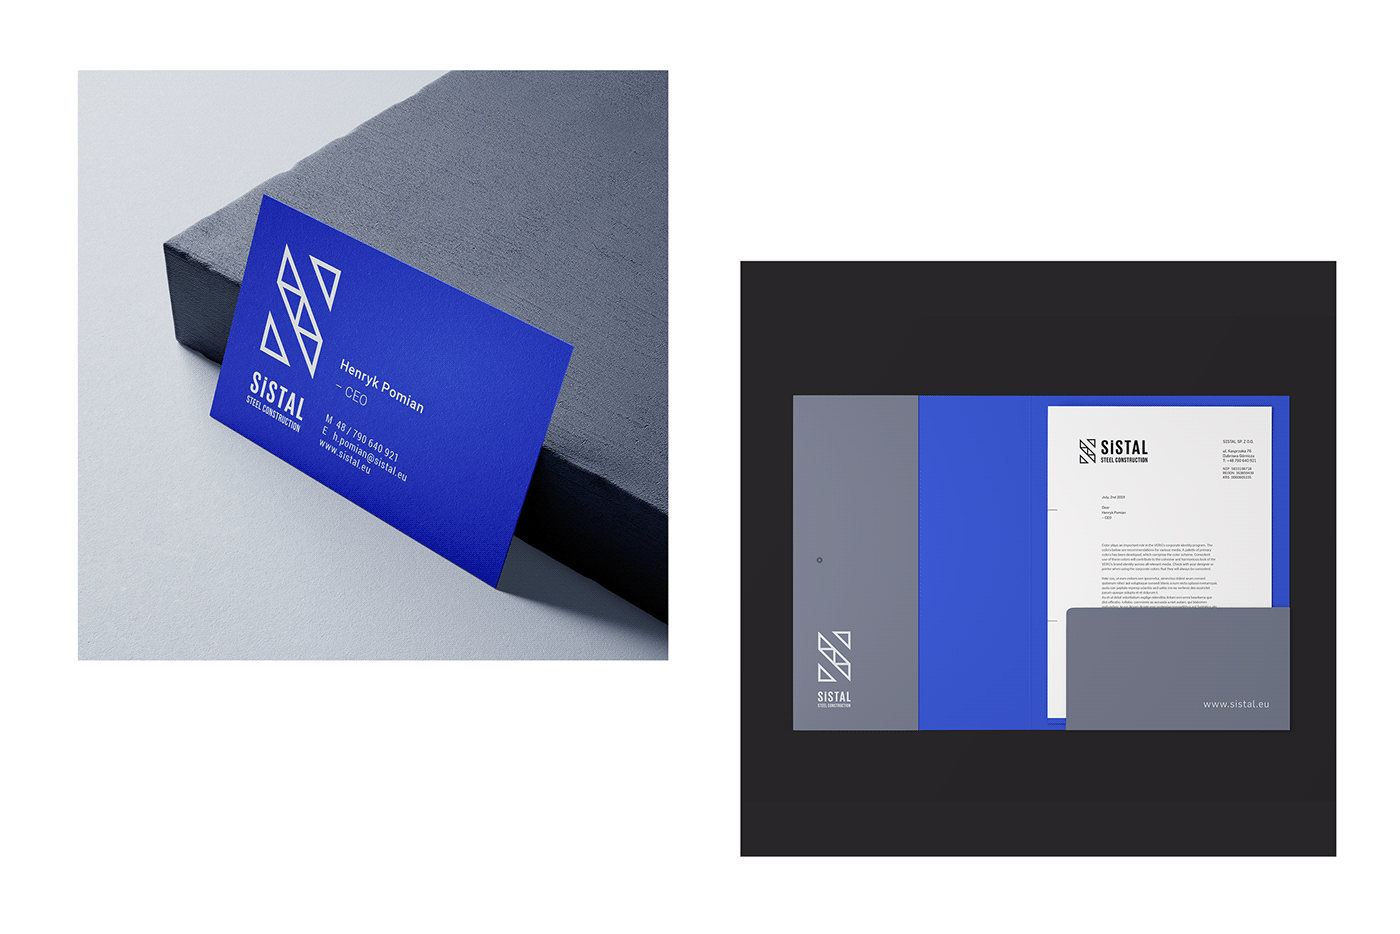 Approved layouts and visualisation of the primary elements of the SiSTAL stationery system.